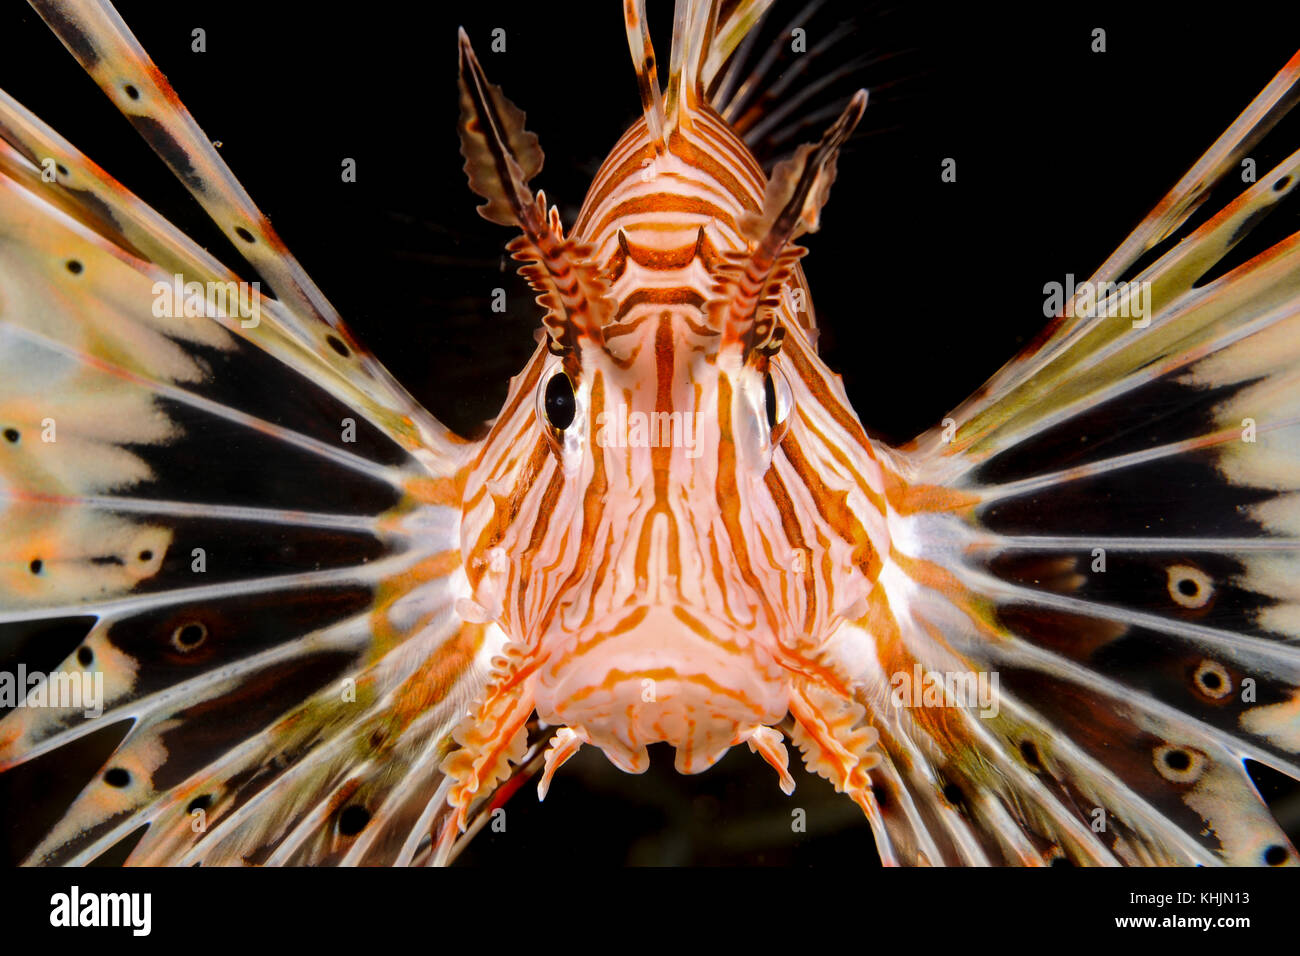 Israel, Eilat, Red Sea, – Underwater photograph of a radial Lionfish Pterois radiata close up of the head and face Stock Photo